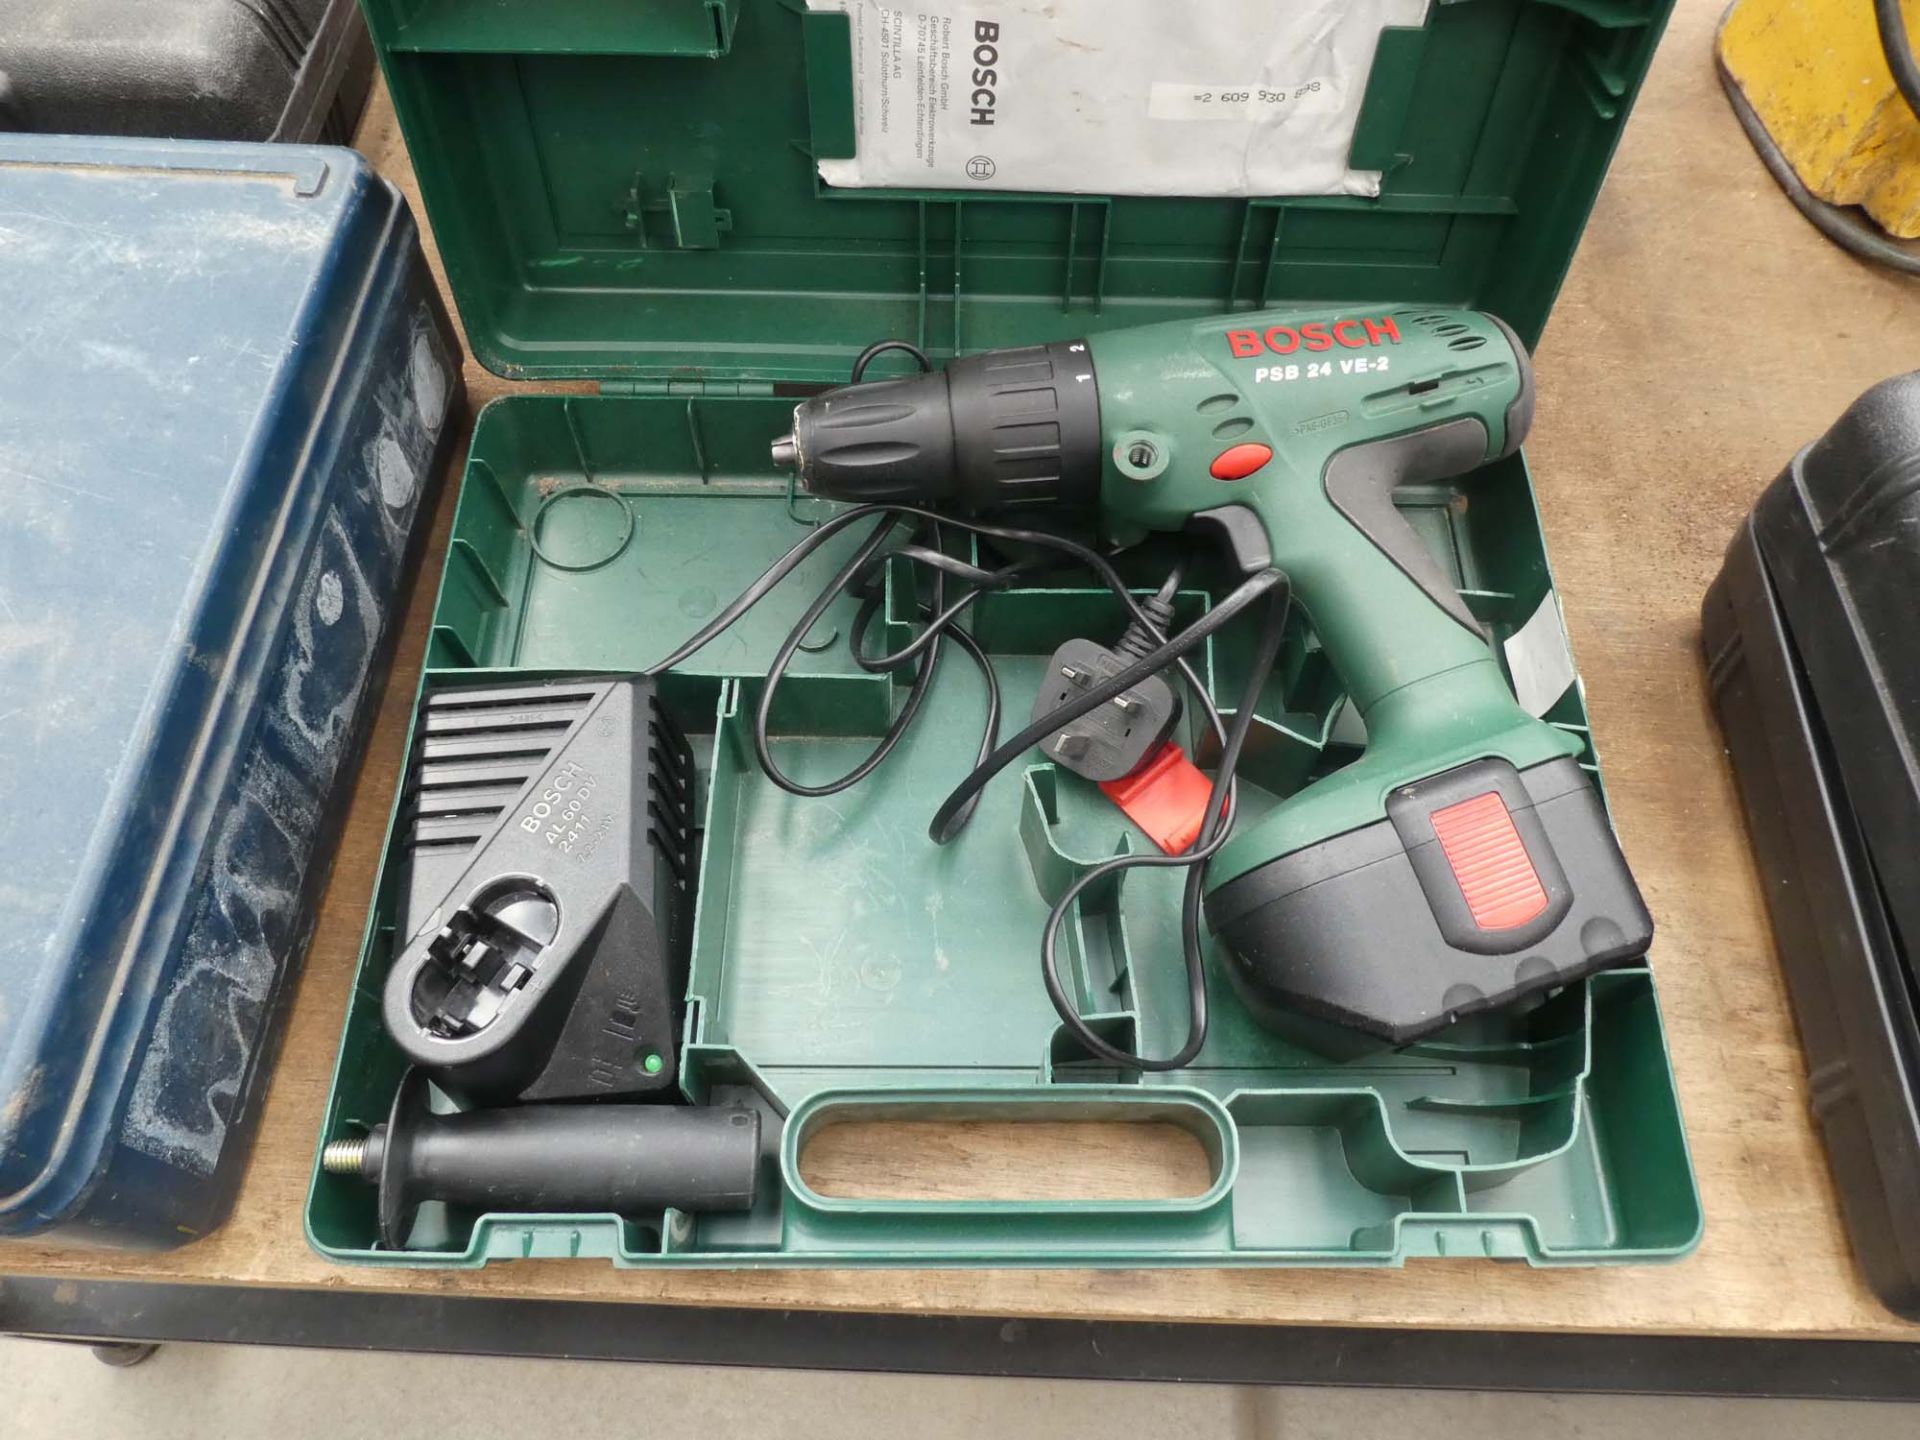 4370 Bosch battery drill with 1 battery and charger